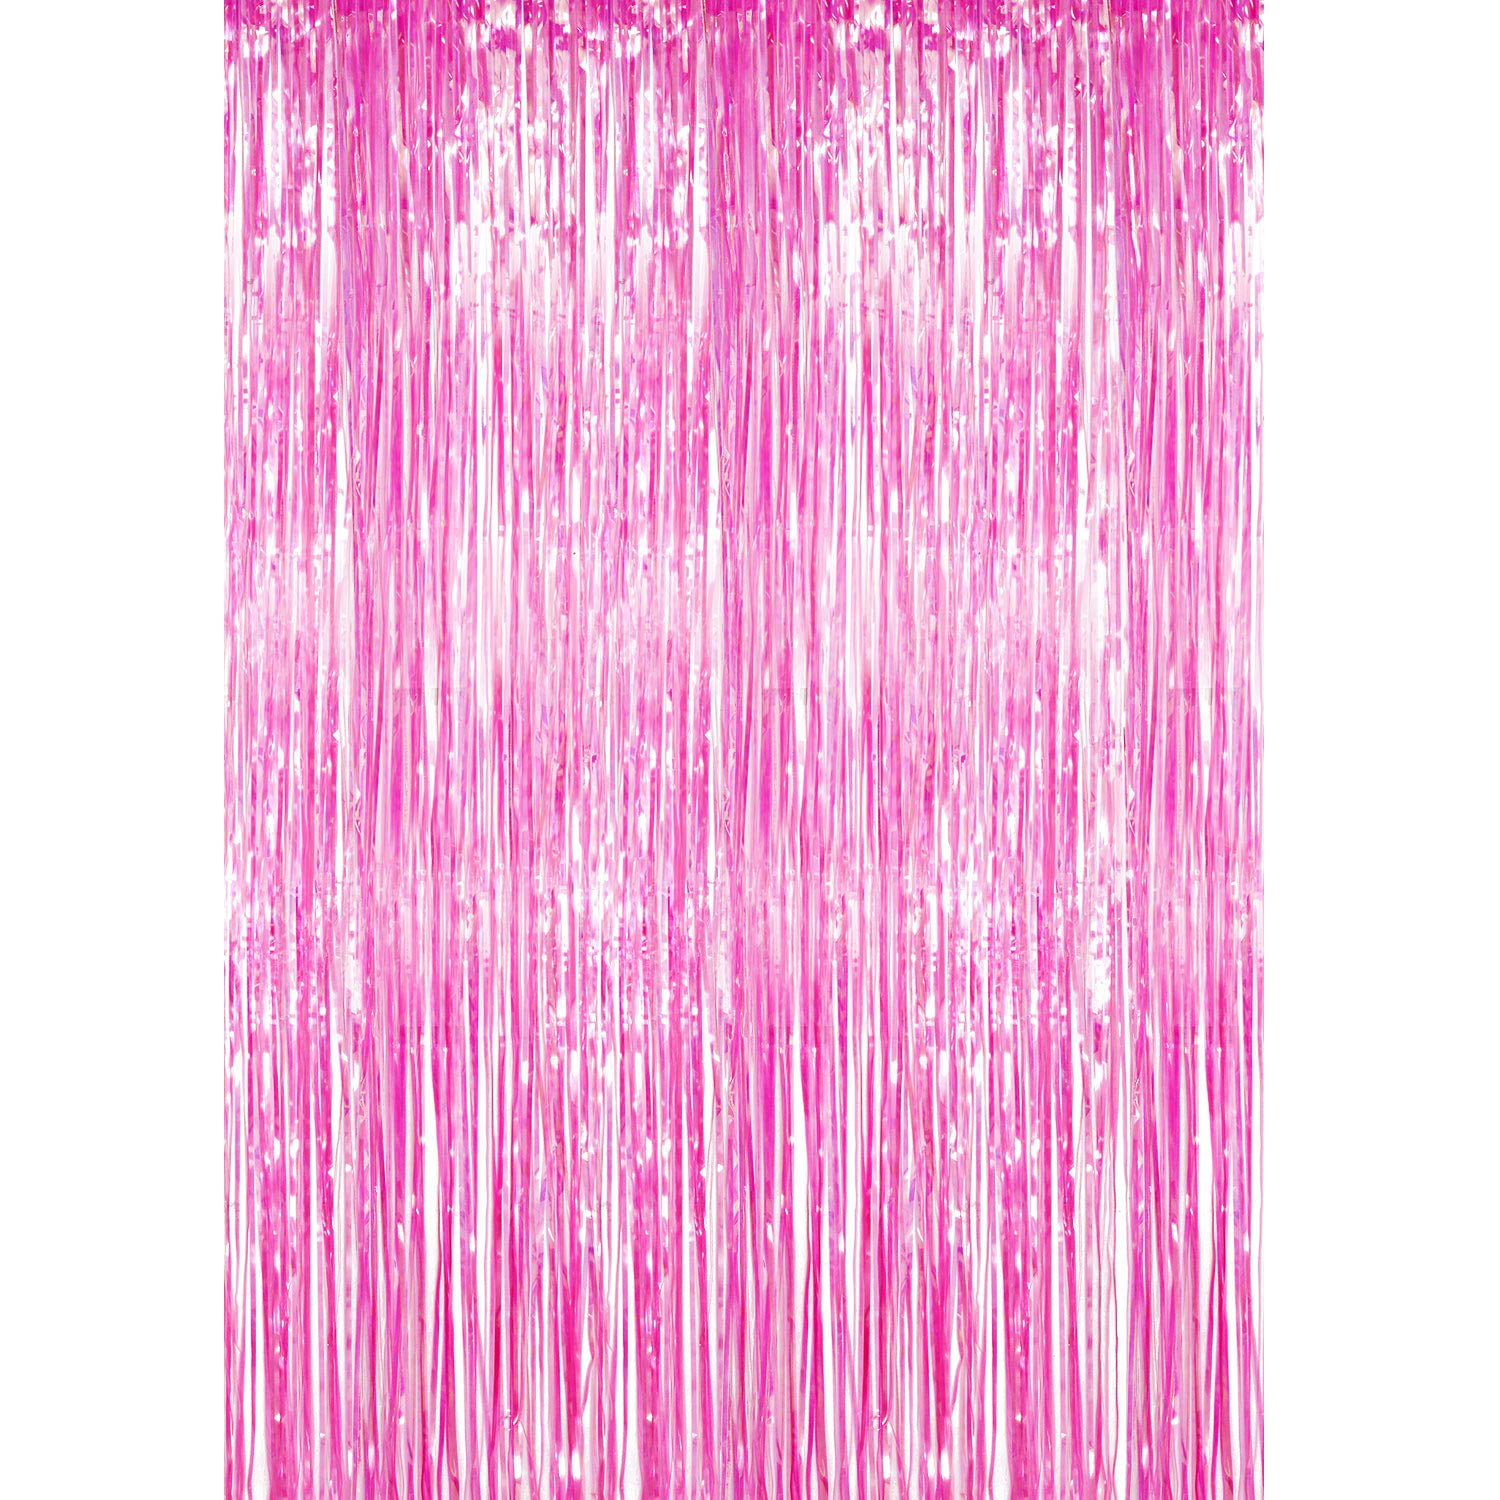 LITTLE FEATHER 3ft x 8ft Foil Fringe Curtain Photo Booth Props for Birthday Wedding Engagement Bridal Shower Baby Shower Party Photo Backdrop Decorations Gold 